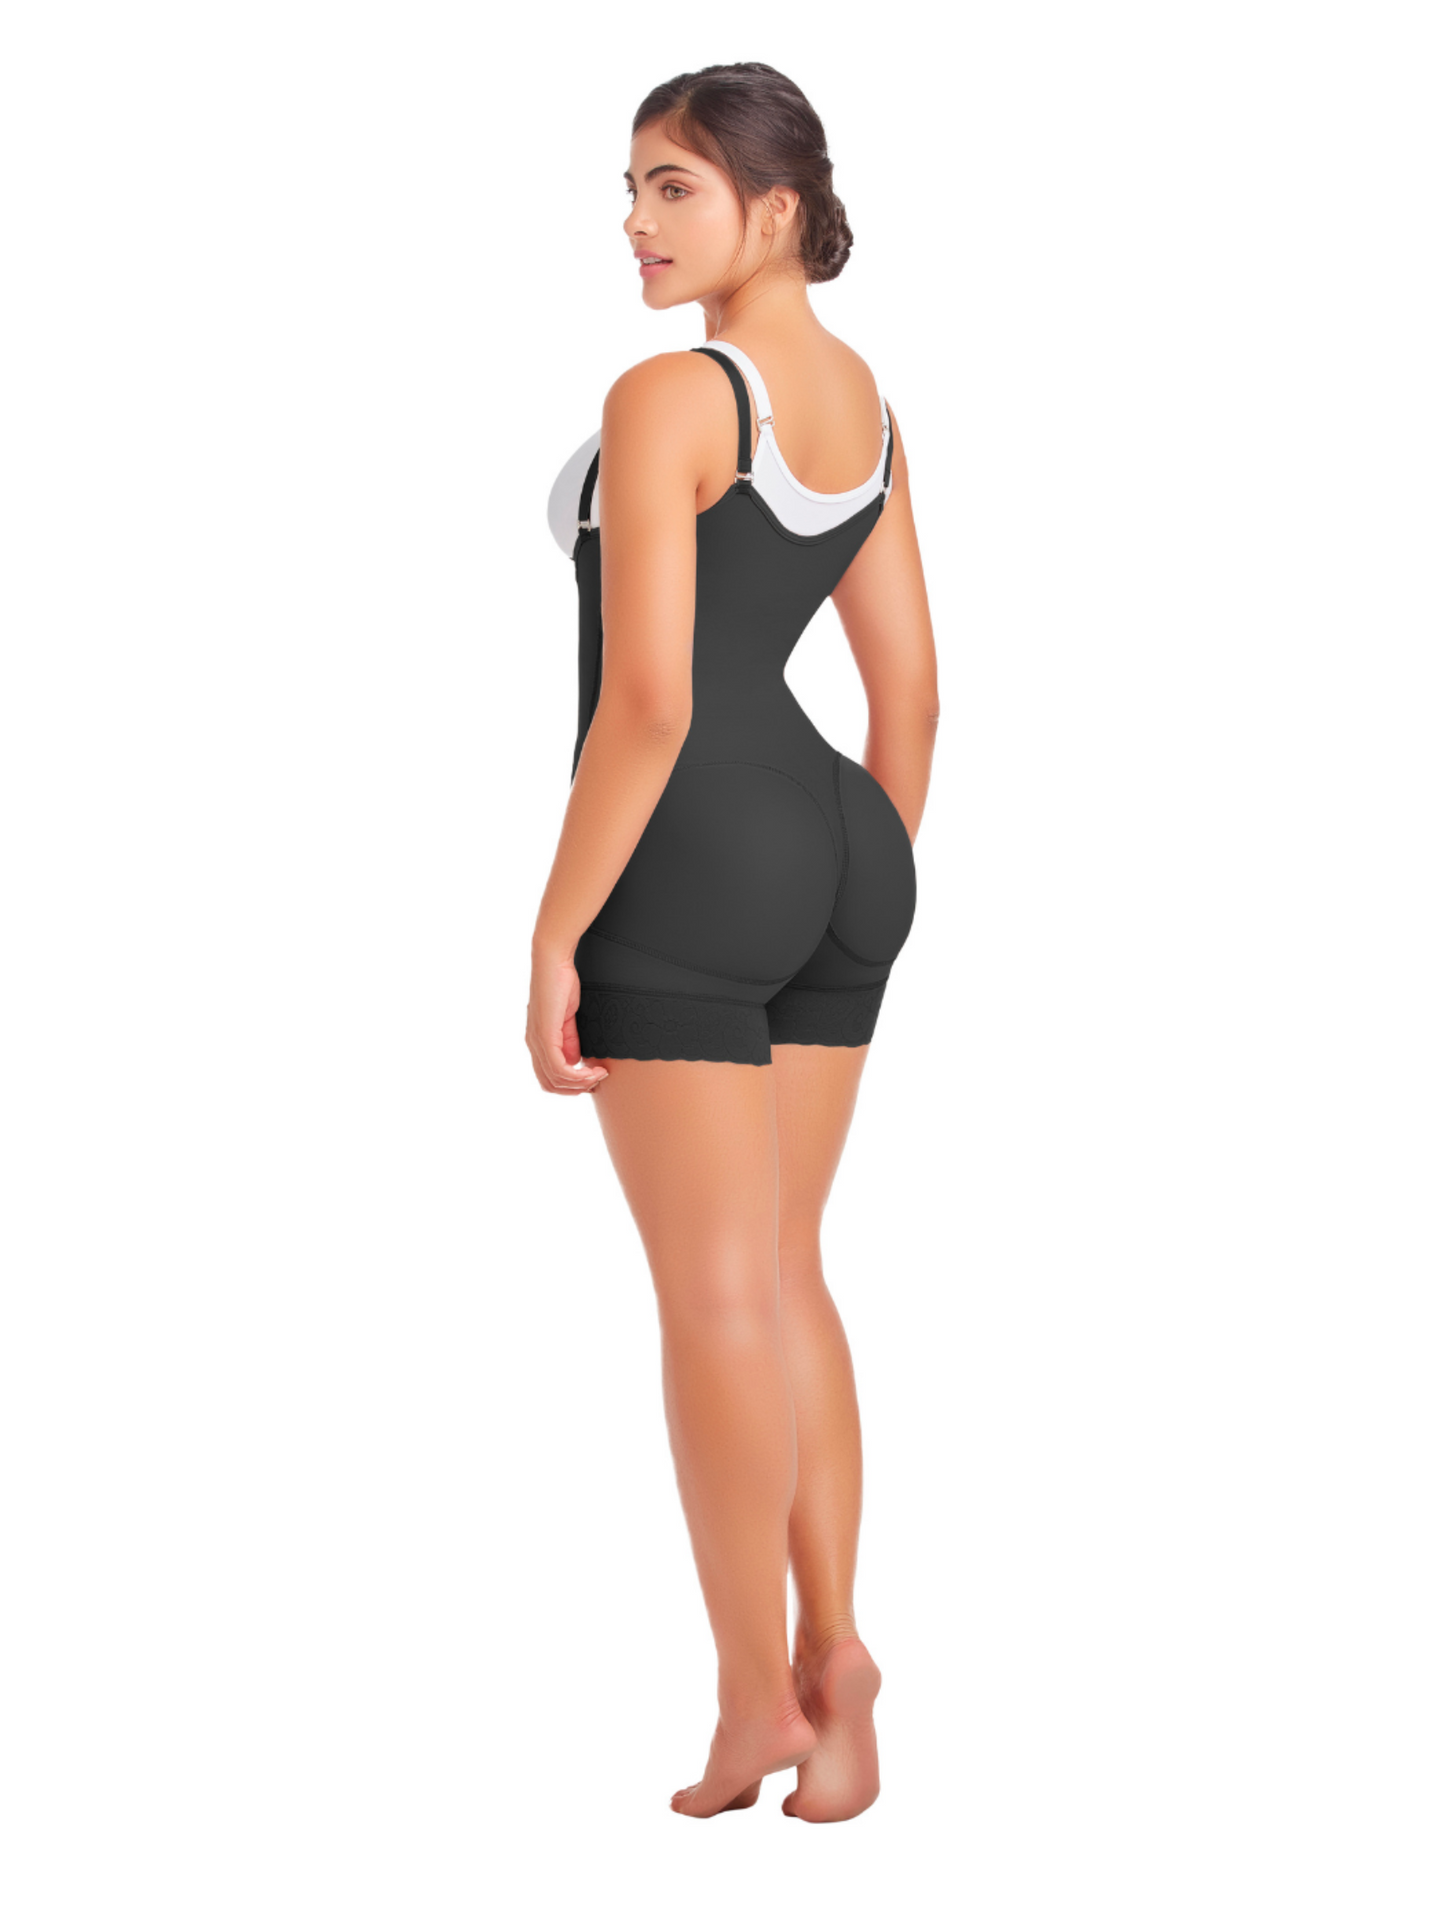 Postpartum and C-Section compression garments : Delie by Fajate Ref 09046